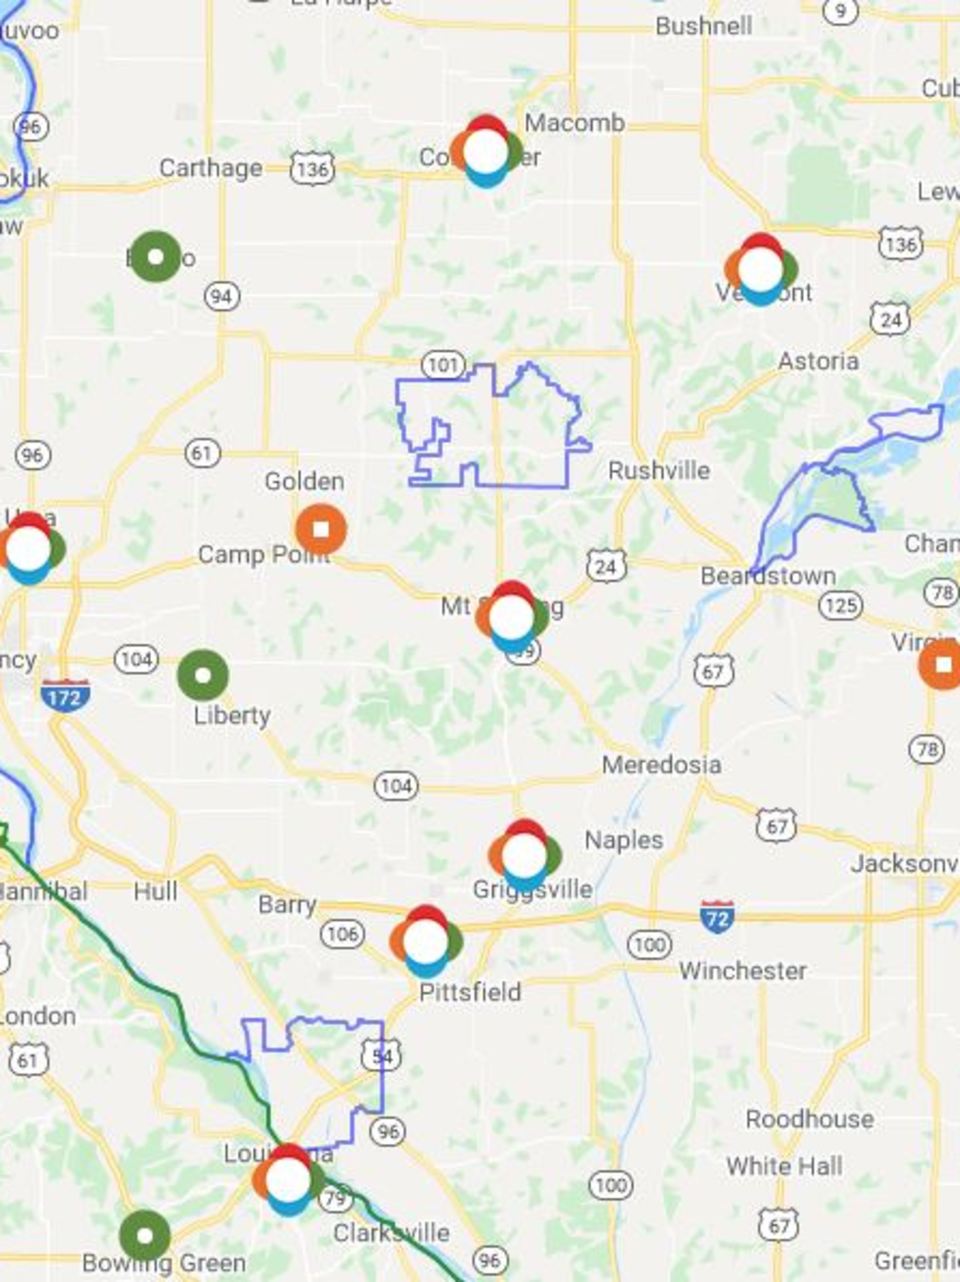 ameren il power outage map Winter Weather Brings Widespread Power Outages Khqa ameren il power outage map